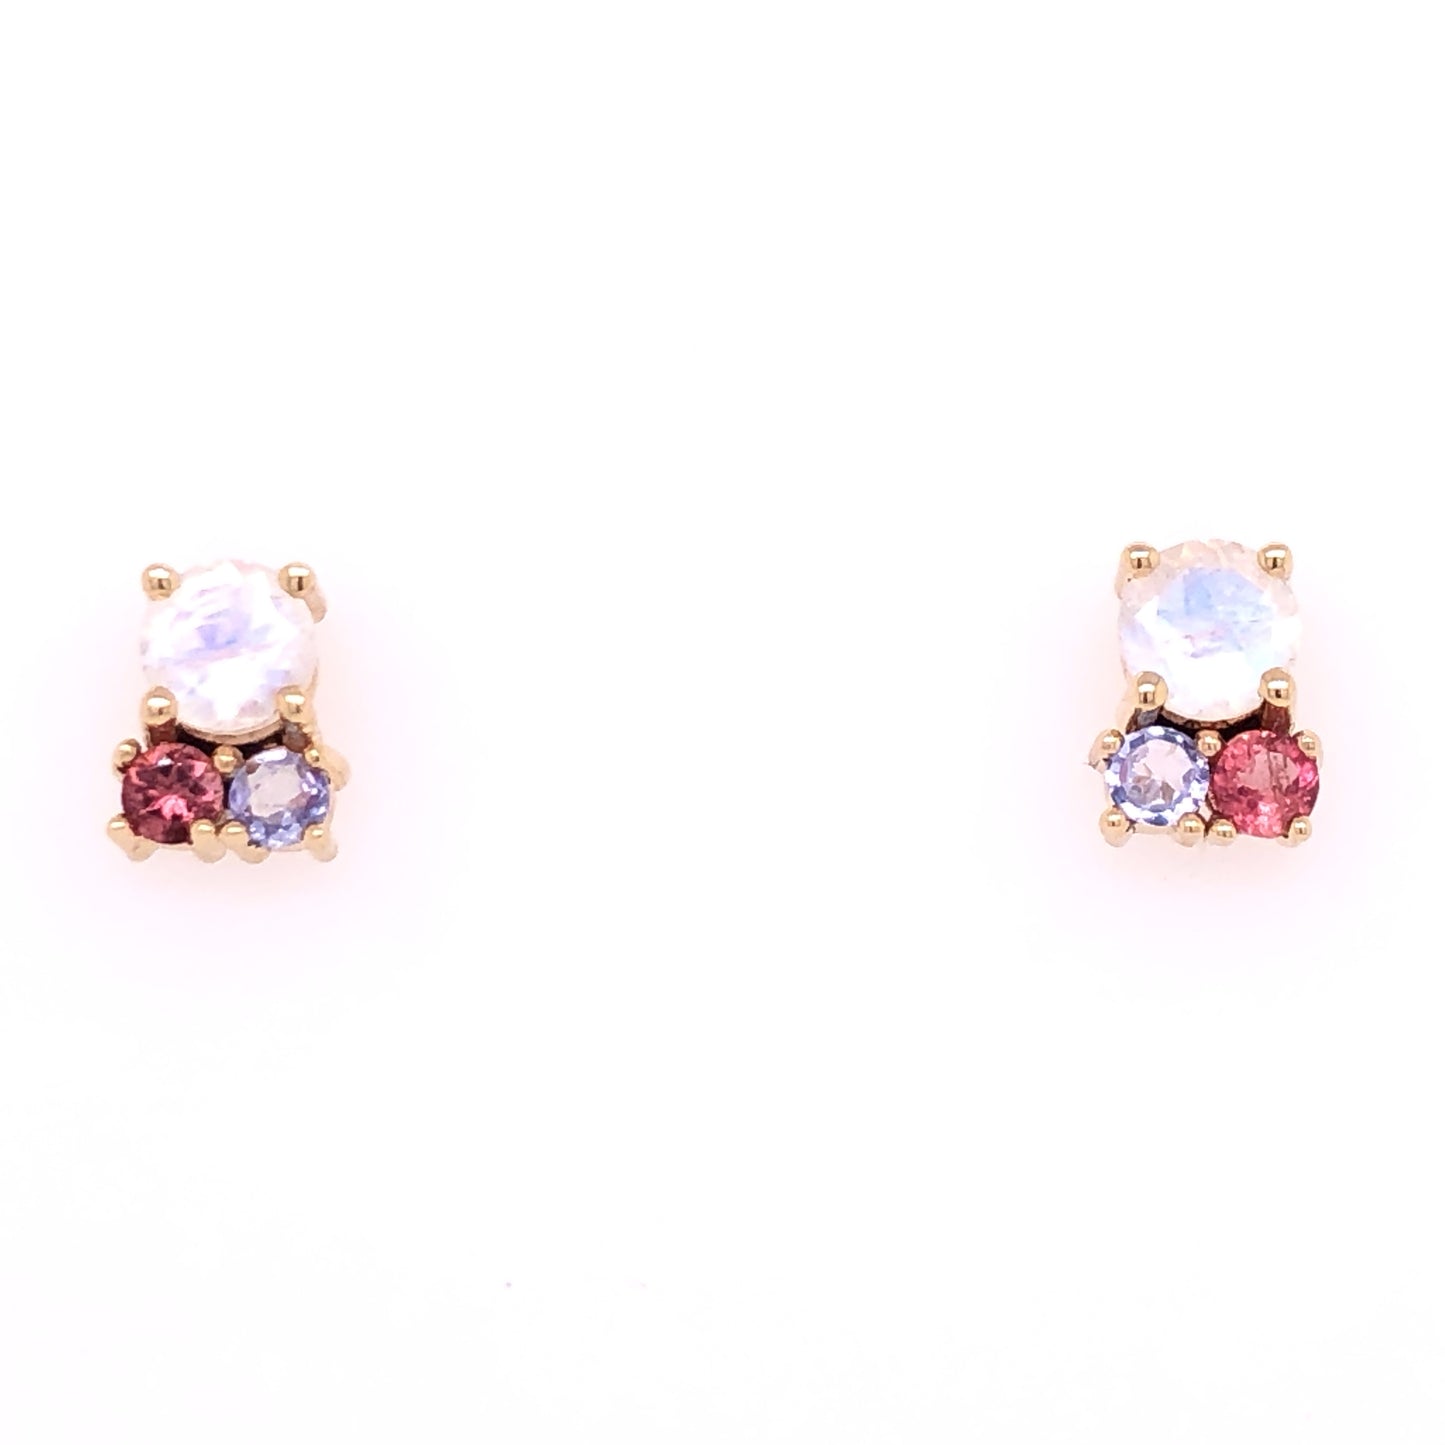 IMMEDIATE DELIVERY / Moonstone Earrings with Tanzanites and Tourmalines / 14k Yellow Gold / Pair